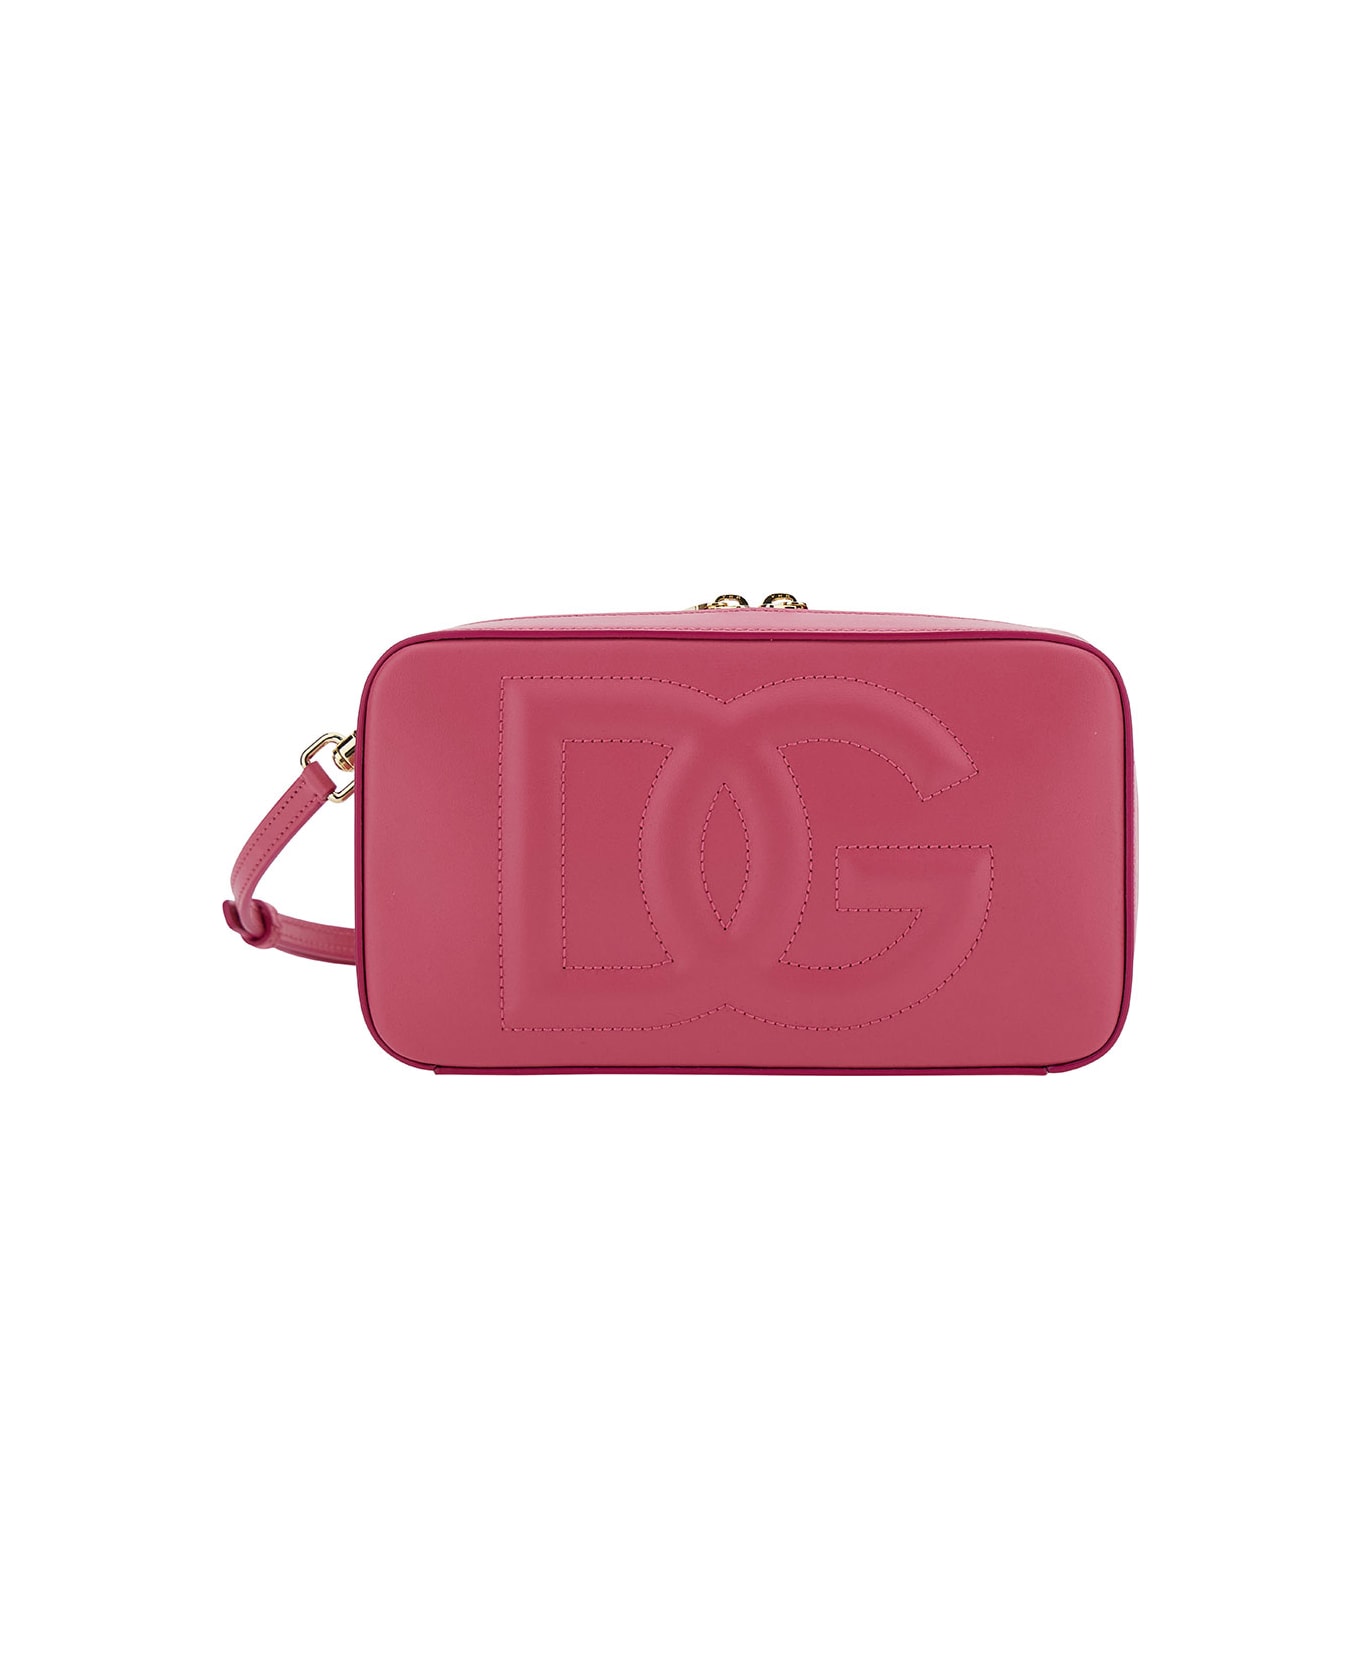 Dolce & Gabbana Pink Shoulder Bag With Quilted Dg Logo In Leather Woman - Pink クラッチバッグ